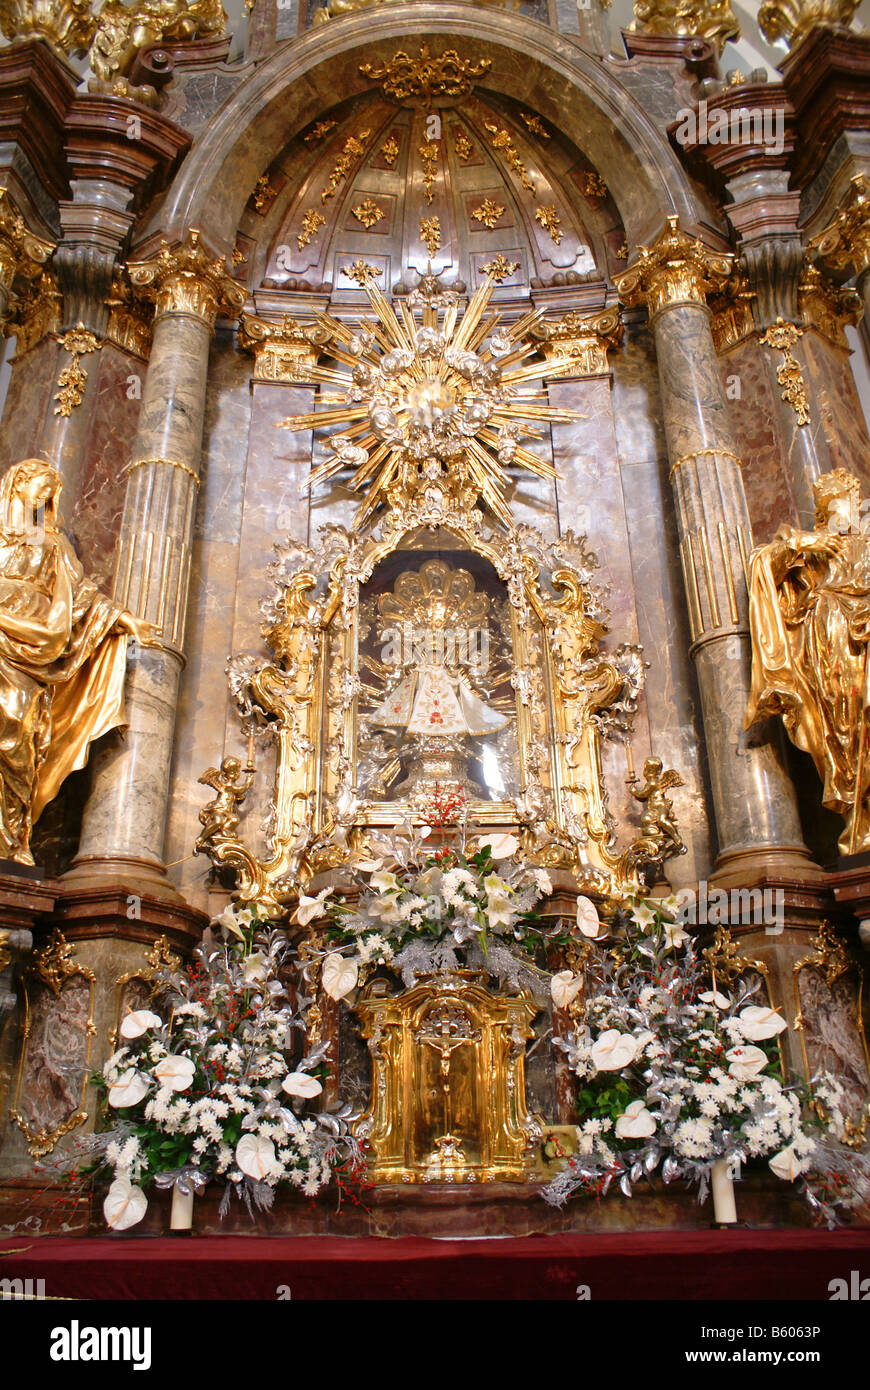 Infant Jesus of Prague, in Church of Our Lady Victorious. Prague, Czech Republic. Stock Photo